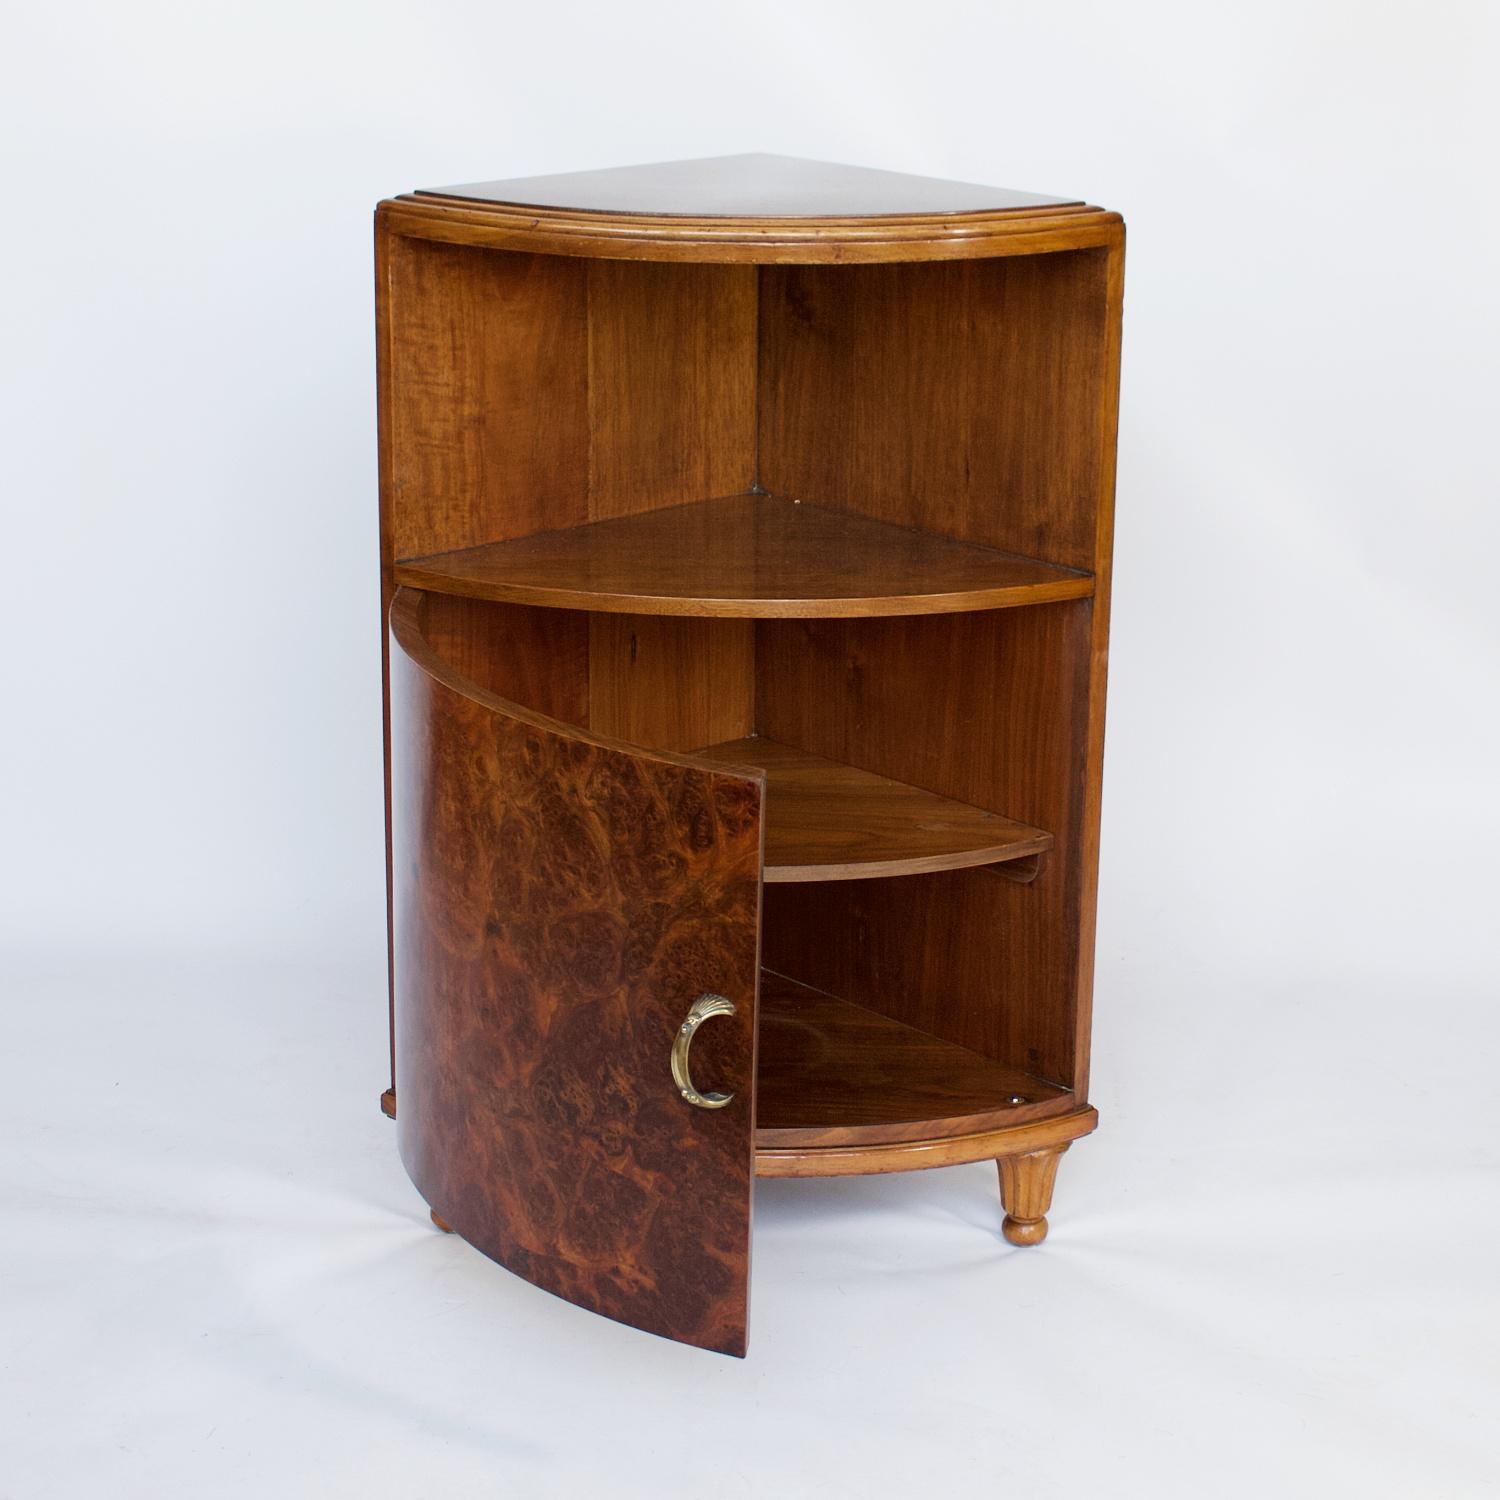 A pair of Art Deco corner cabinets. Burr walnut veneer to top and front with straight grain walnut veneered shelves and backs. 

Dimensions: H 76 cm, W 35 cm, D 35 cm 

Origin: French

Date: circa, 1920

Item number: 104201

All of our